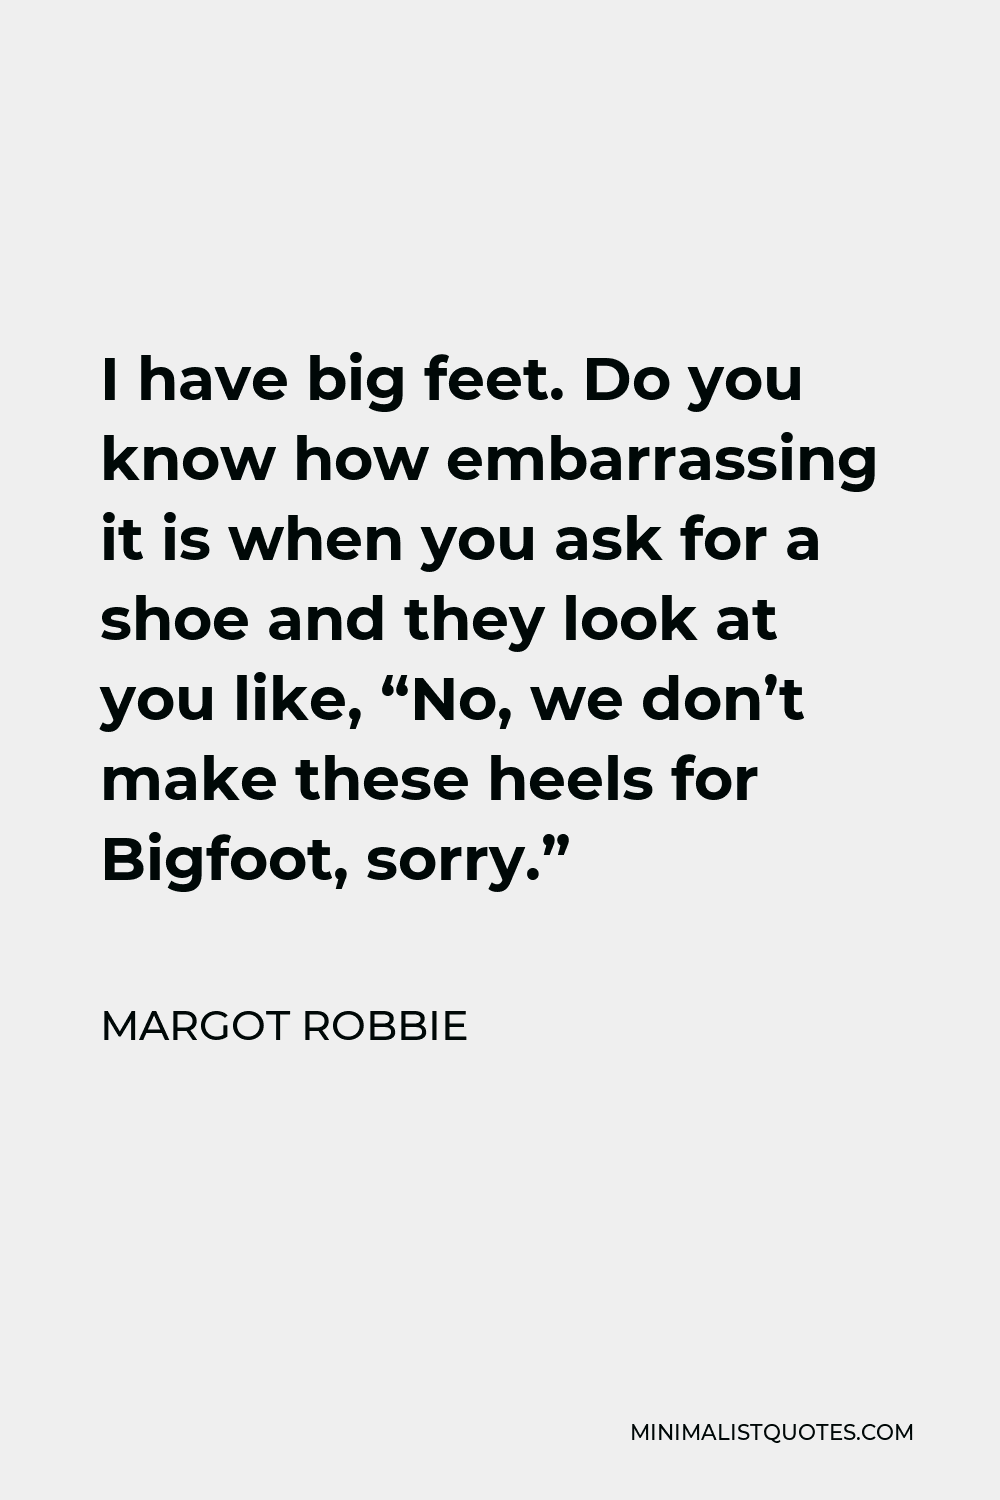 Margot Robbie Quote - I have big feet. Do you know how embarrassing it is when you ask for a shoe and they look at you like, “No, we don’t make these heels for Bigfoot, sorry.”